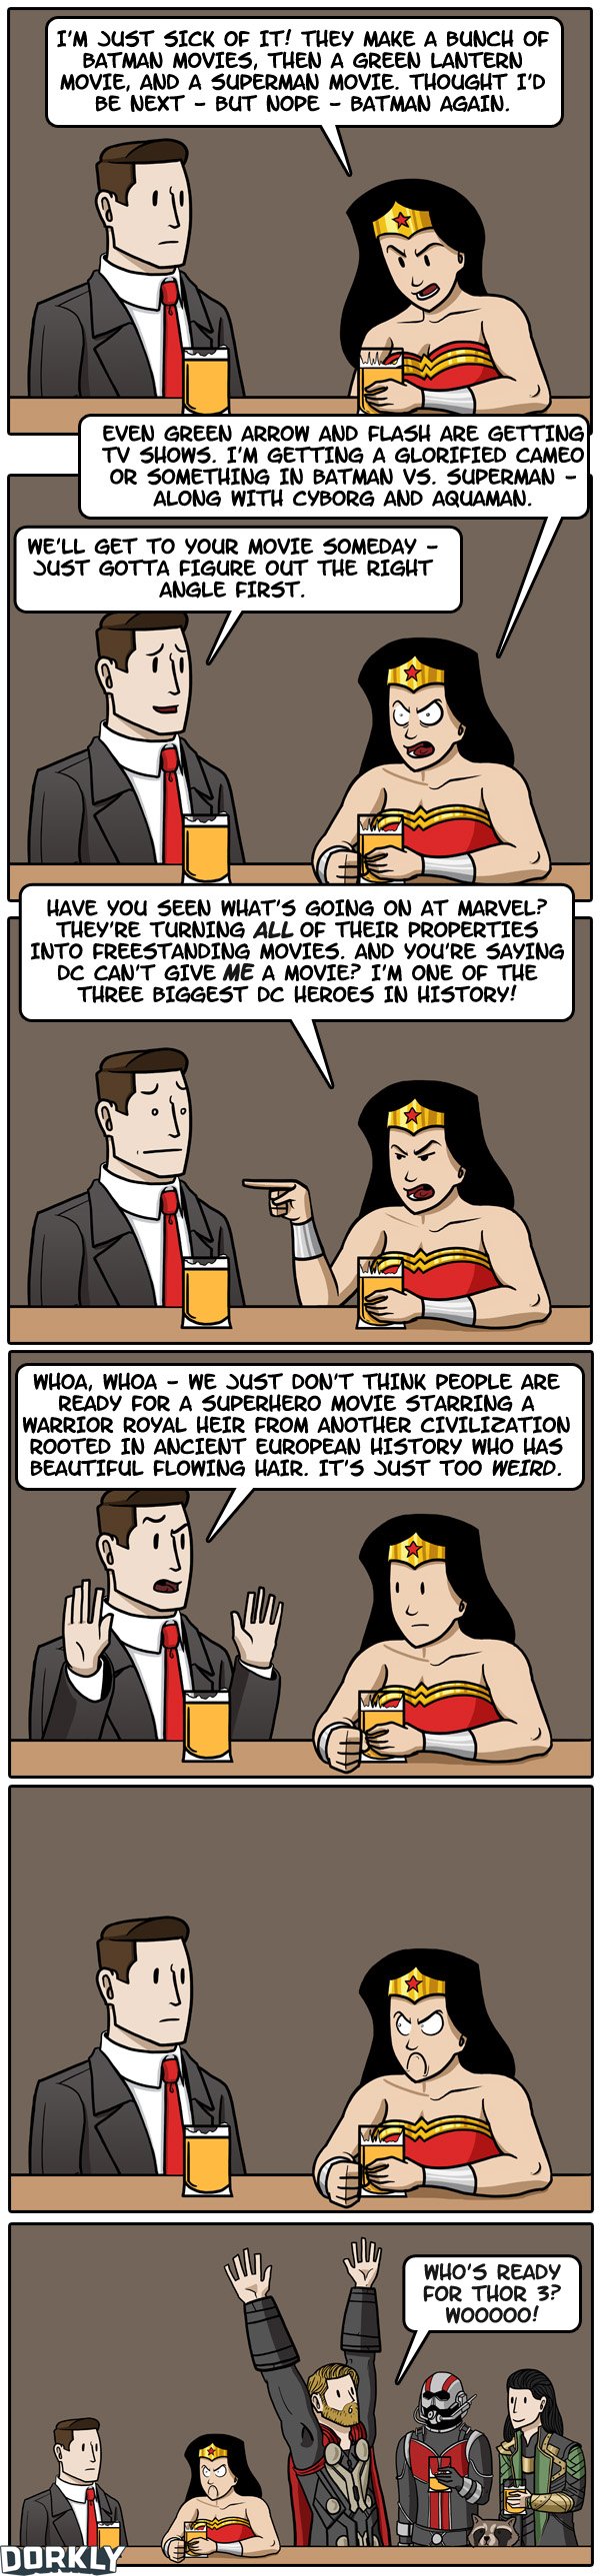 The Issue with Wonder Woman